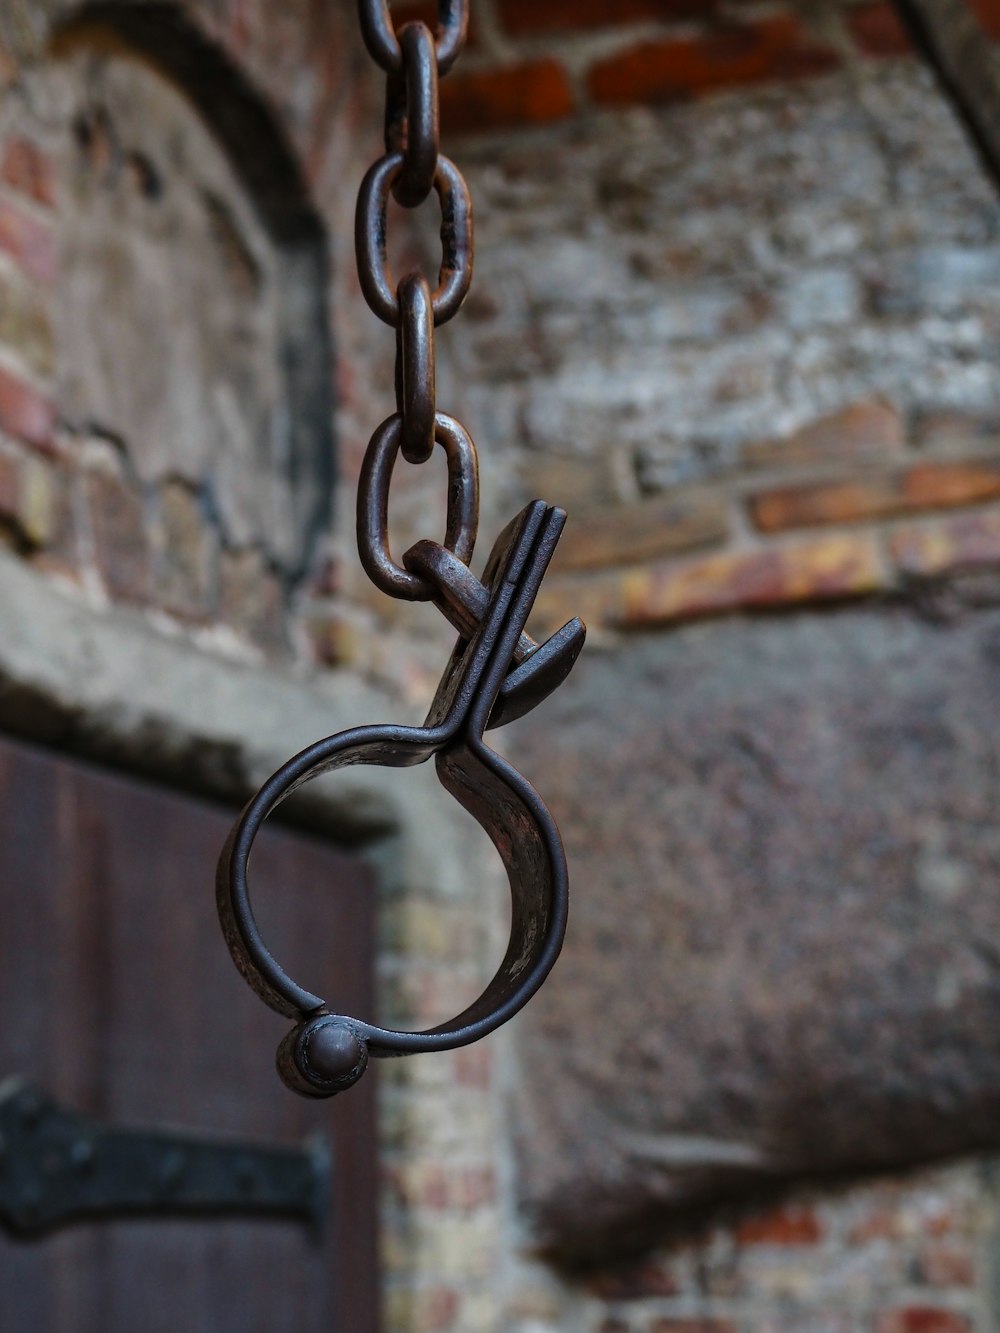 a close up of a metal object hanging from a chain